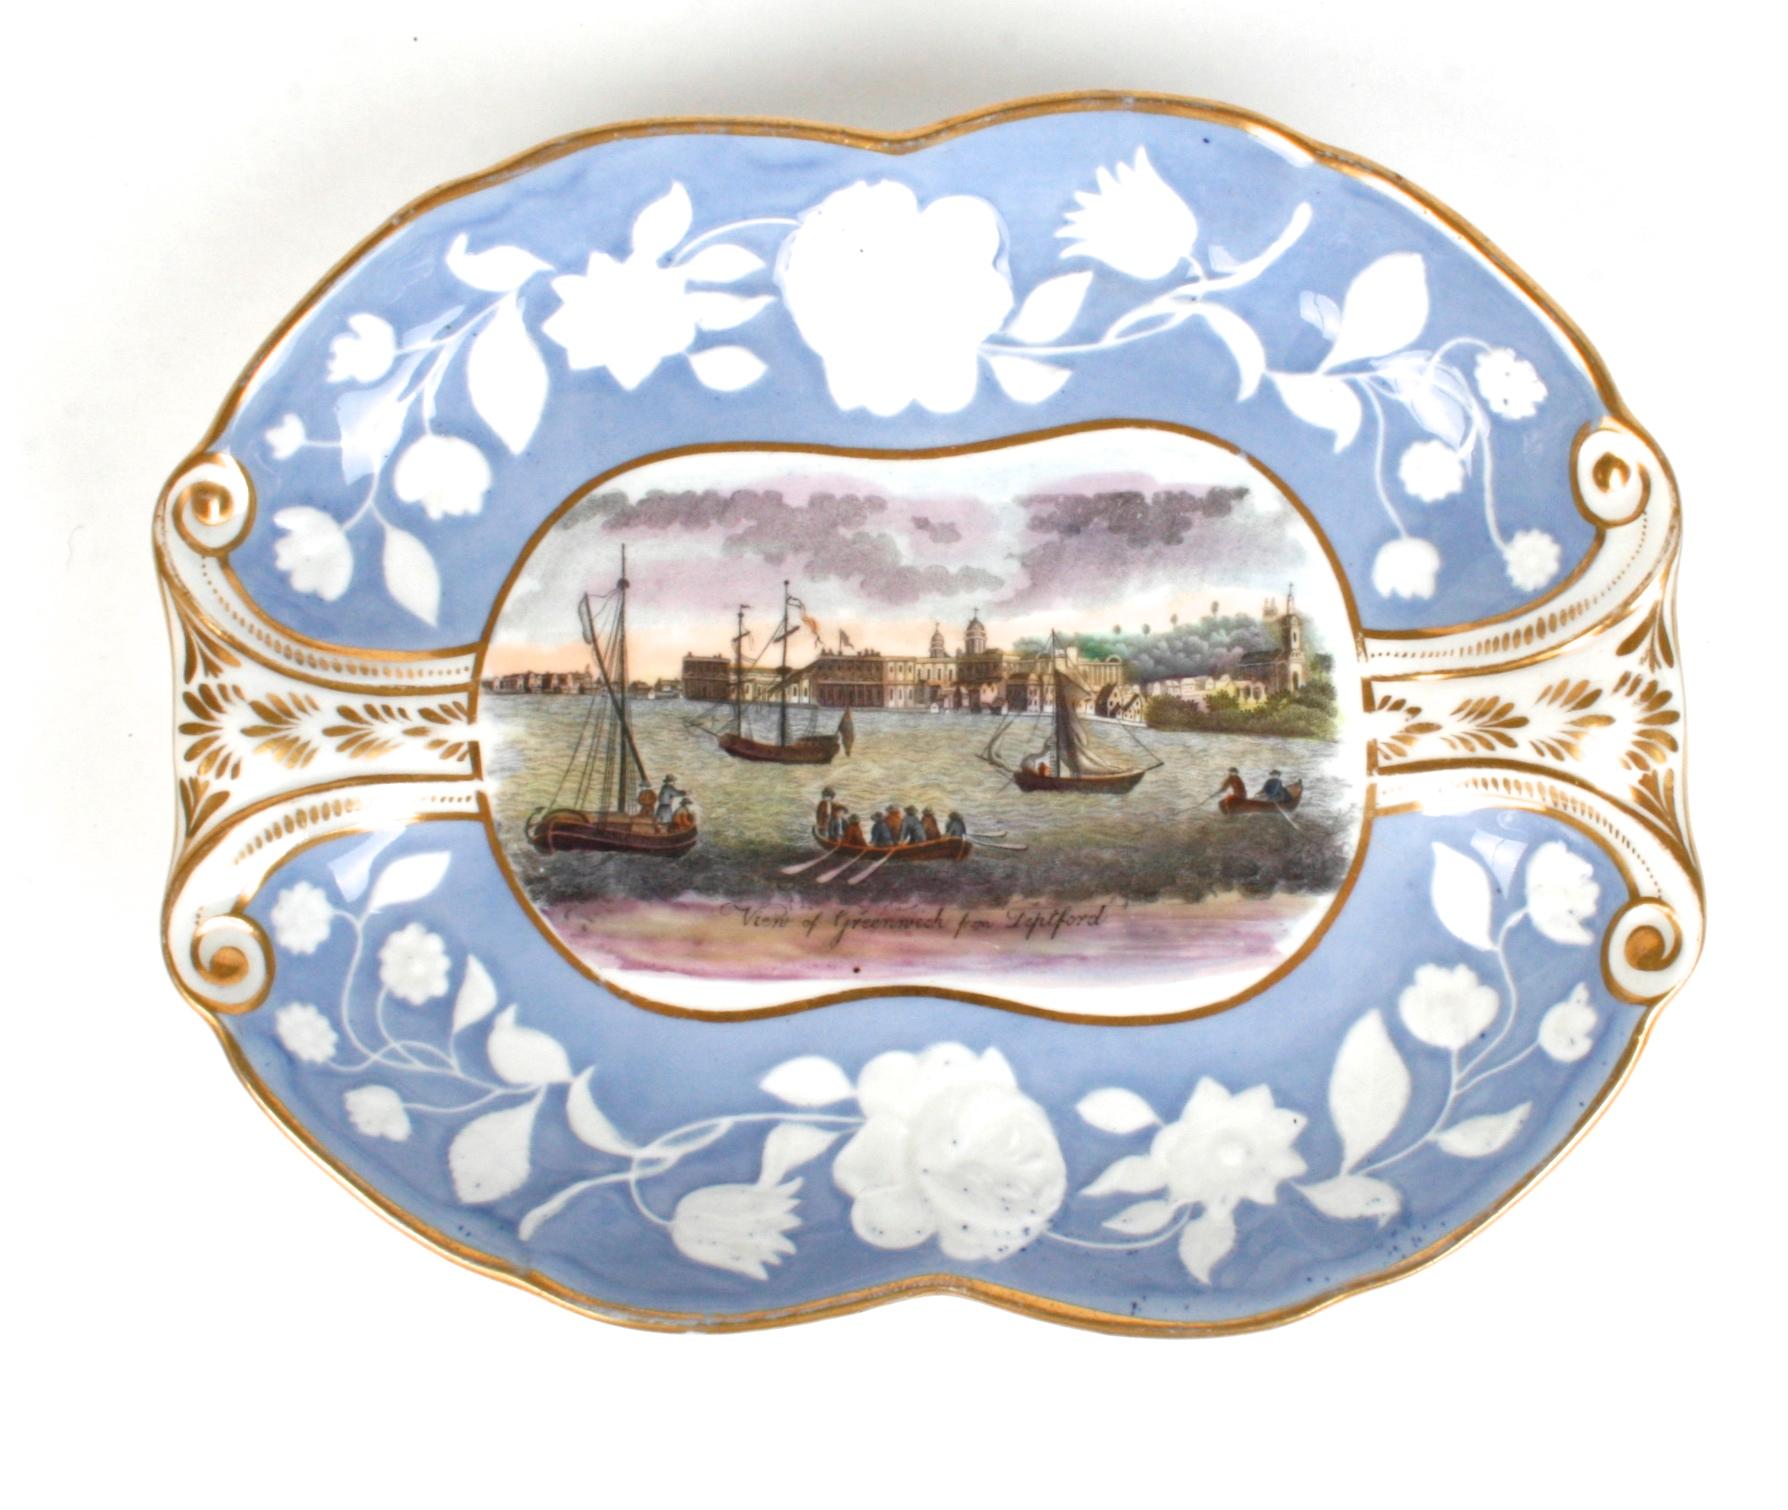 Hall Pâte-Sur-Pâte Serving Pieces with British Scenery, circa 1800 In Good Condition For Sale In valatie, NY